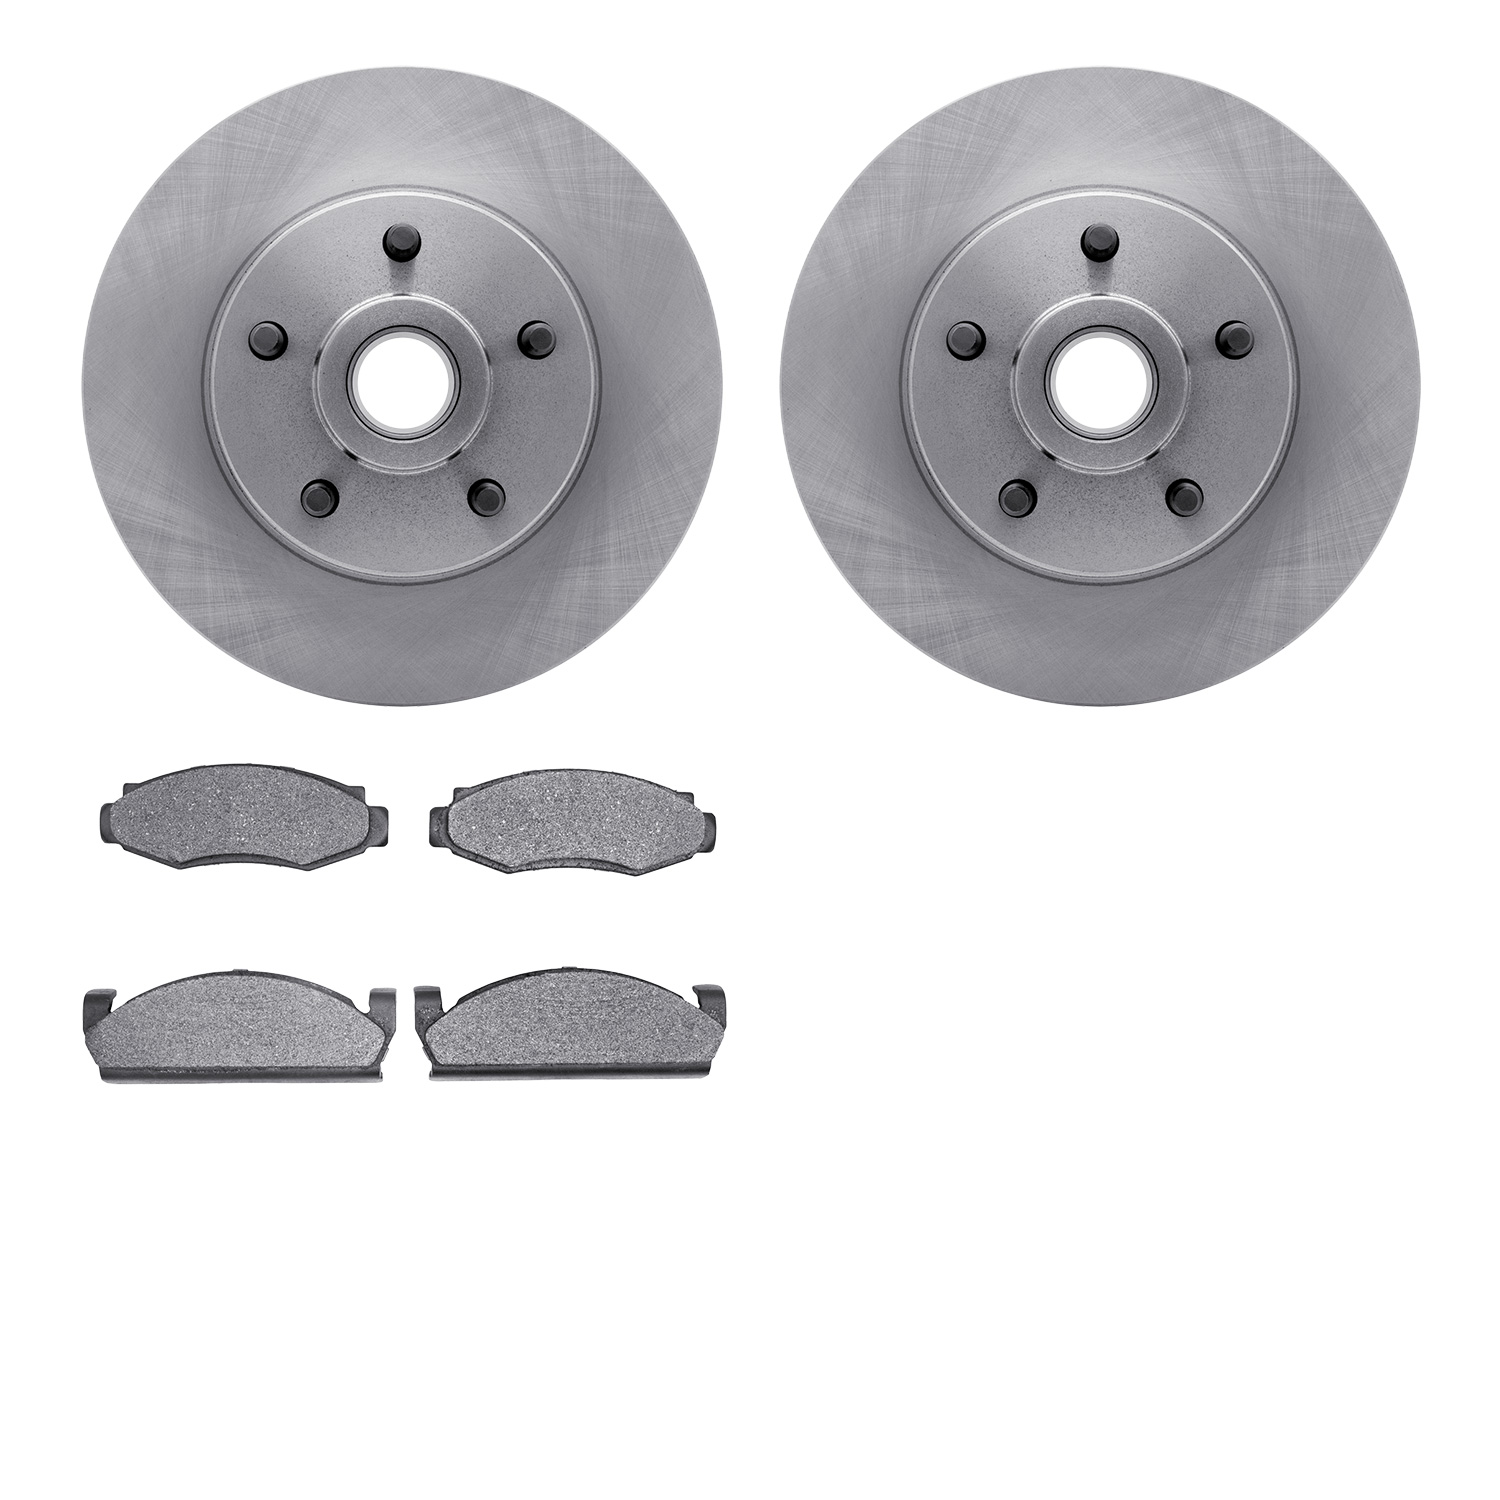 6402-66007 Brake Rotors with Ultimate-Duty Brake Pads, 1979-1980 GM, Position: Front